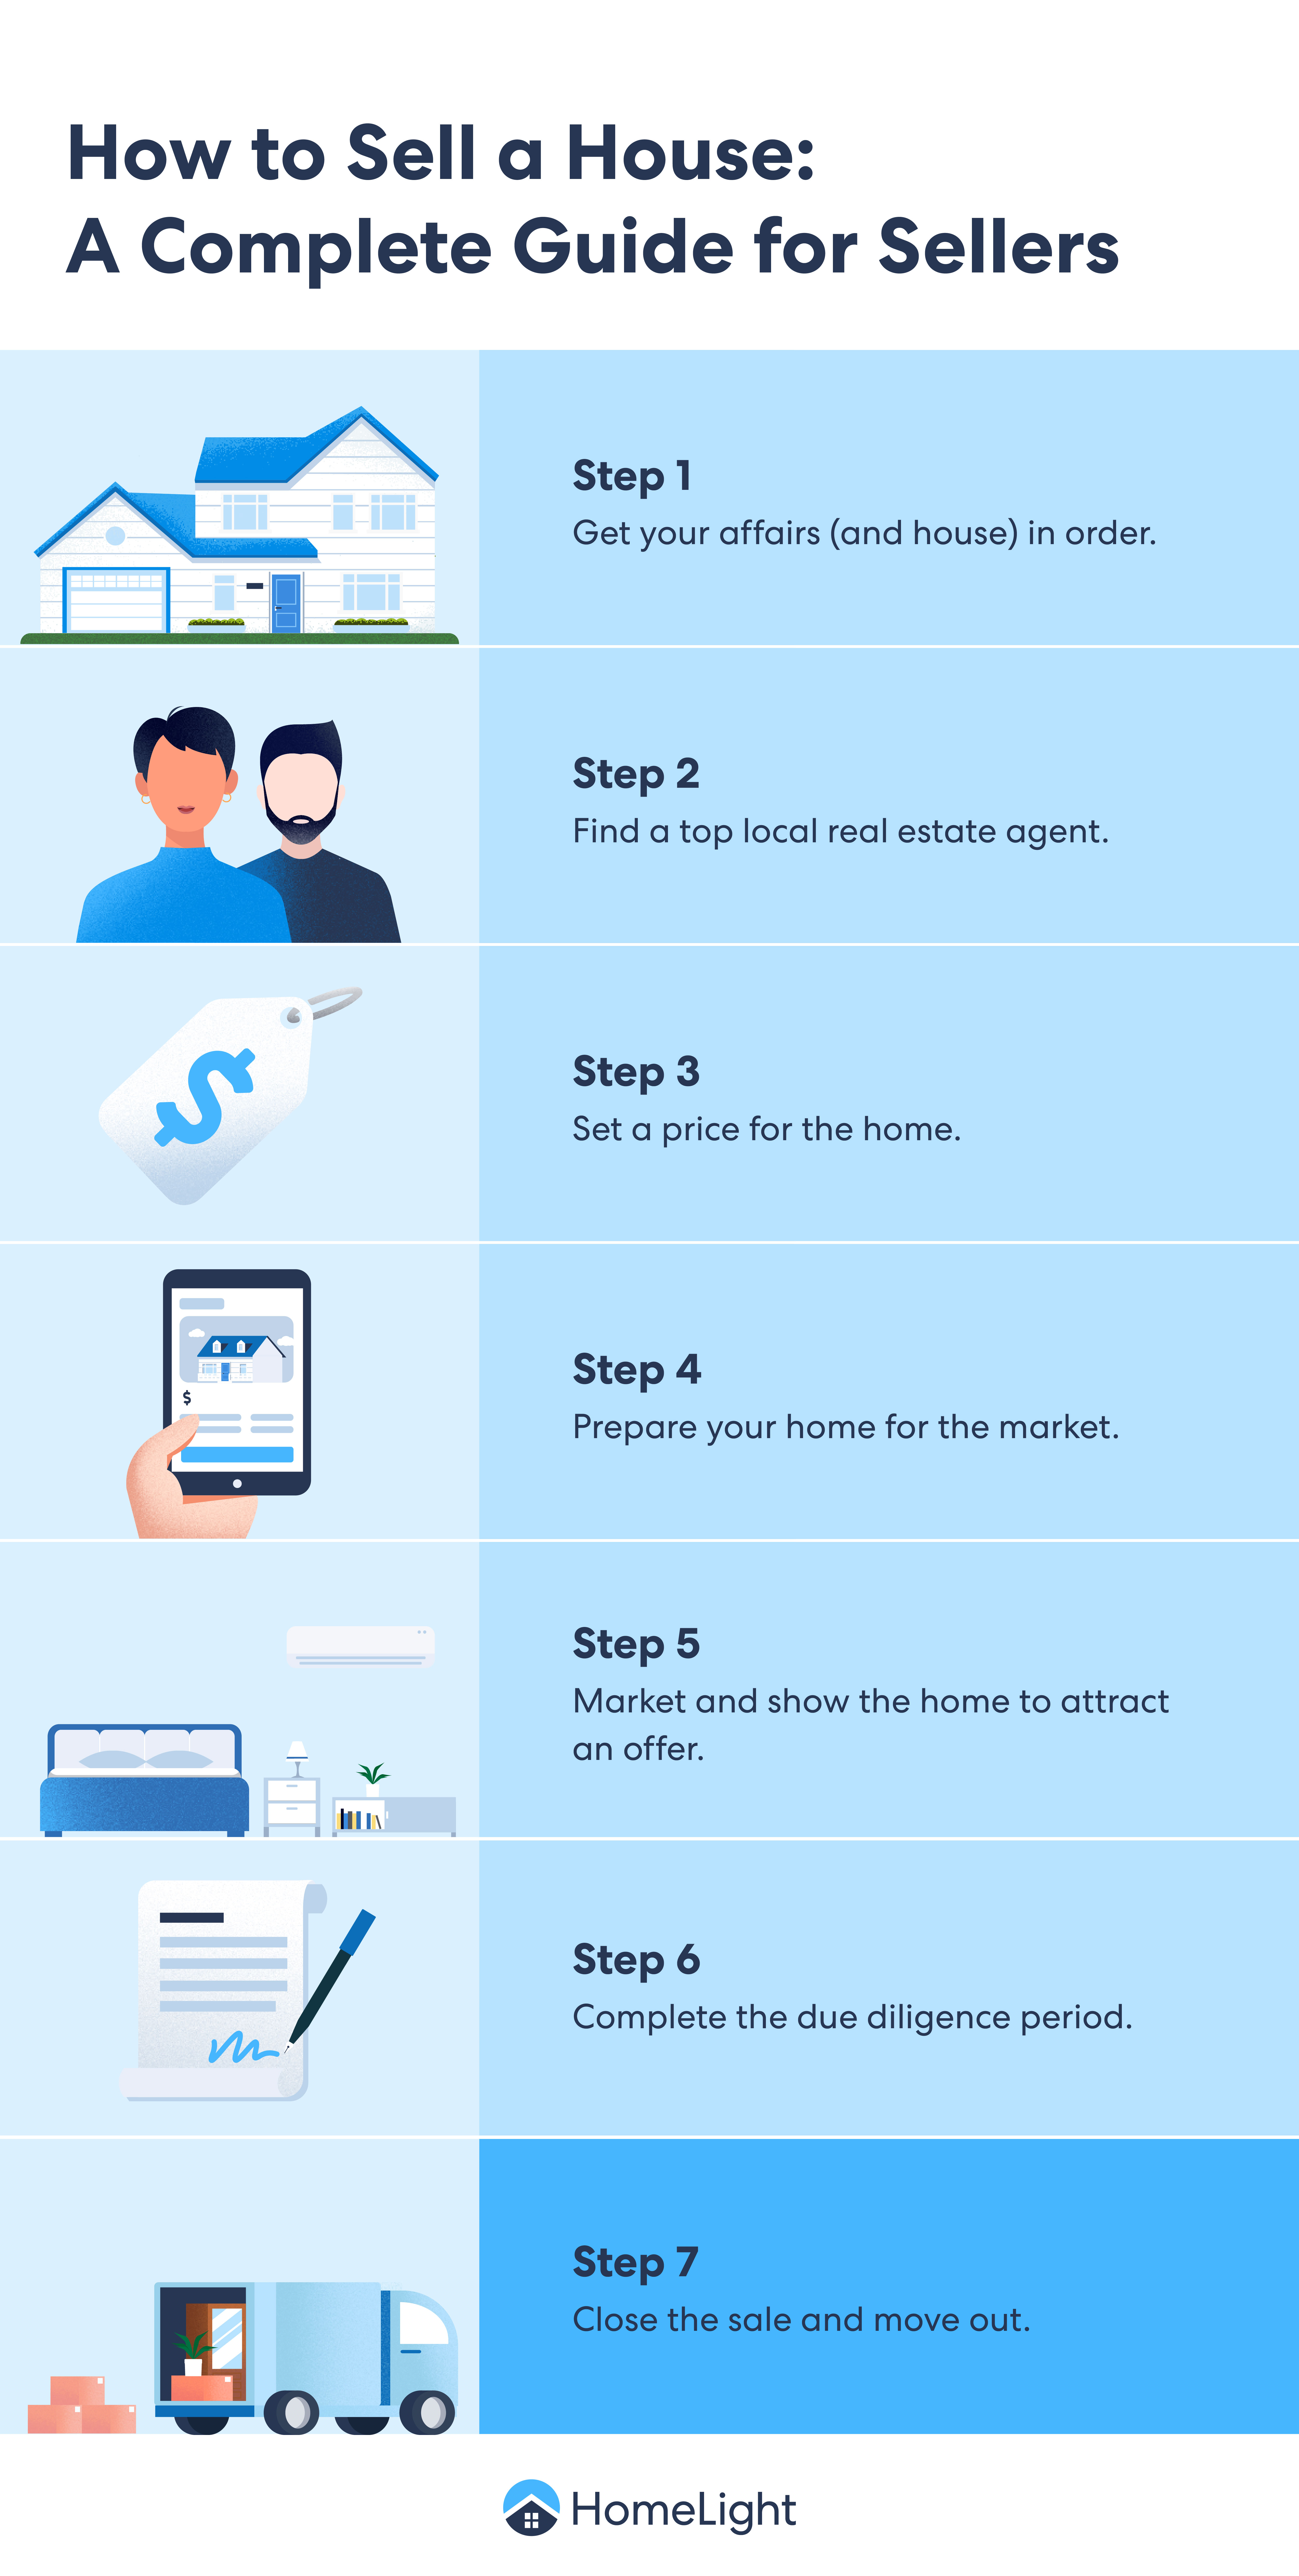 A HomeLight infographic about selling a house.